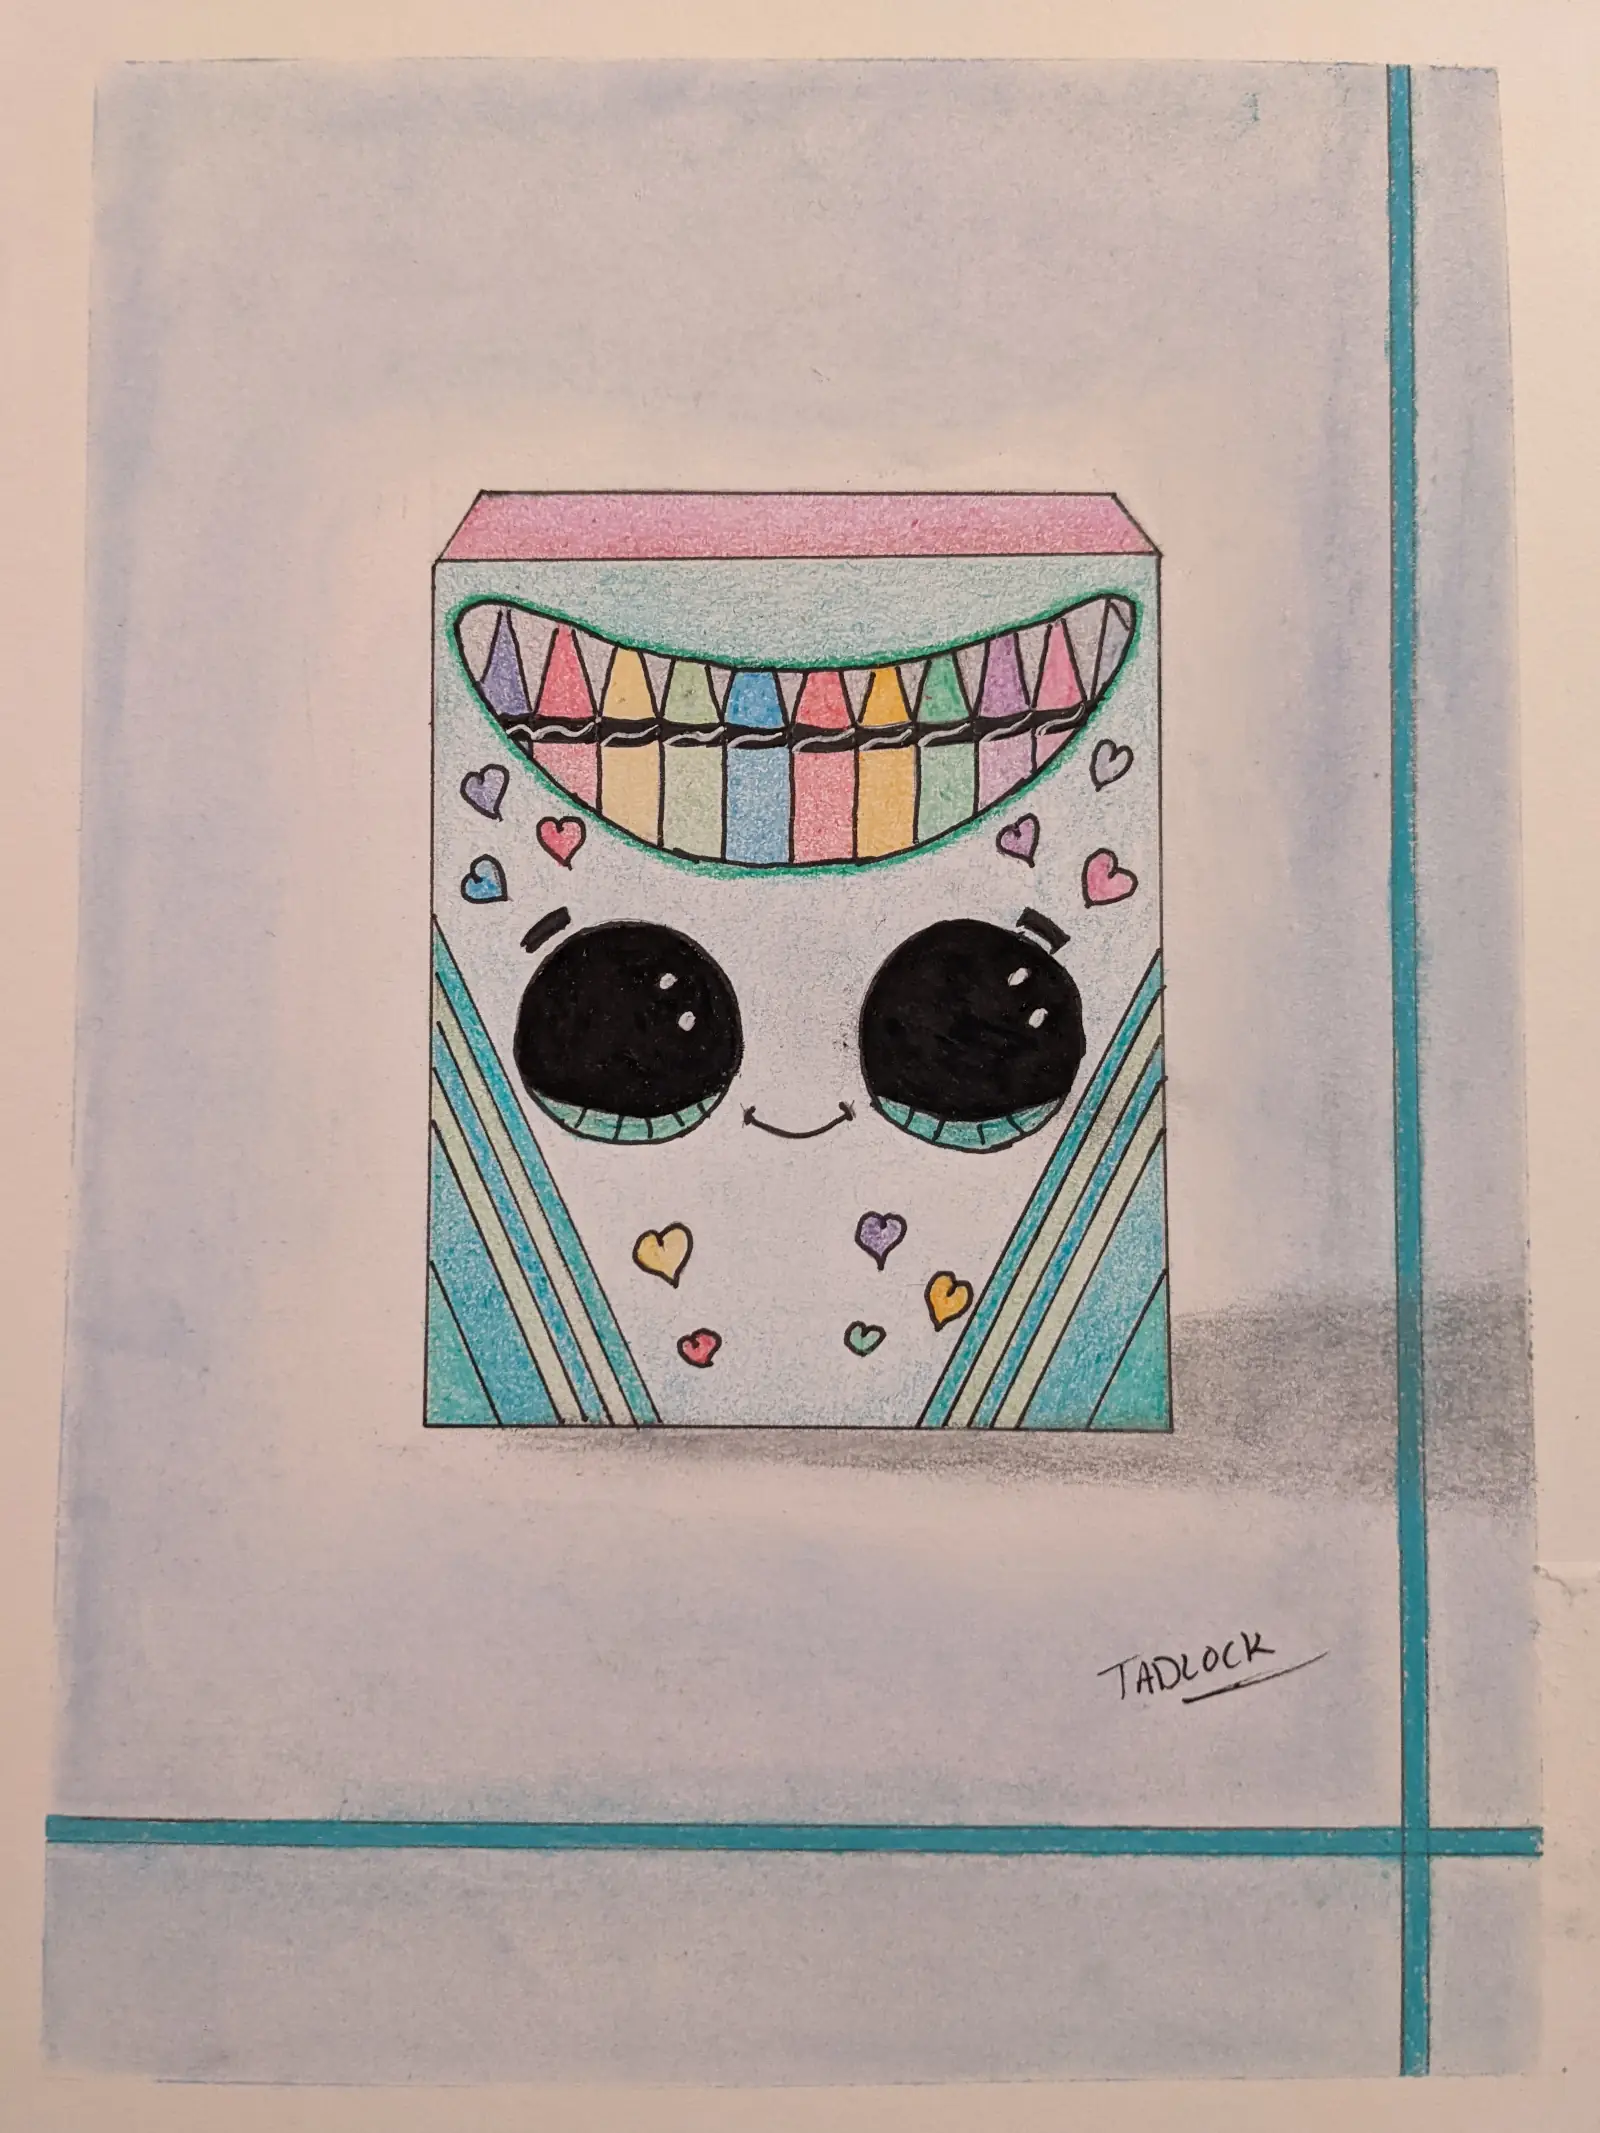 Hand-drawn color crayon box with a face and hearts on the design. Fully colored.